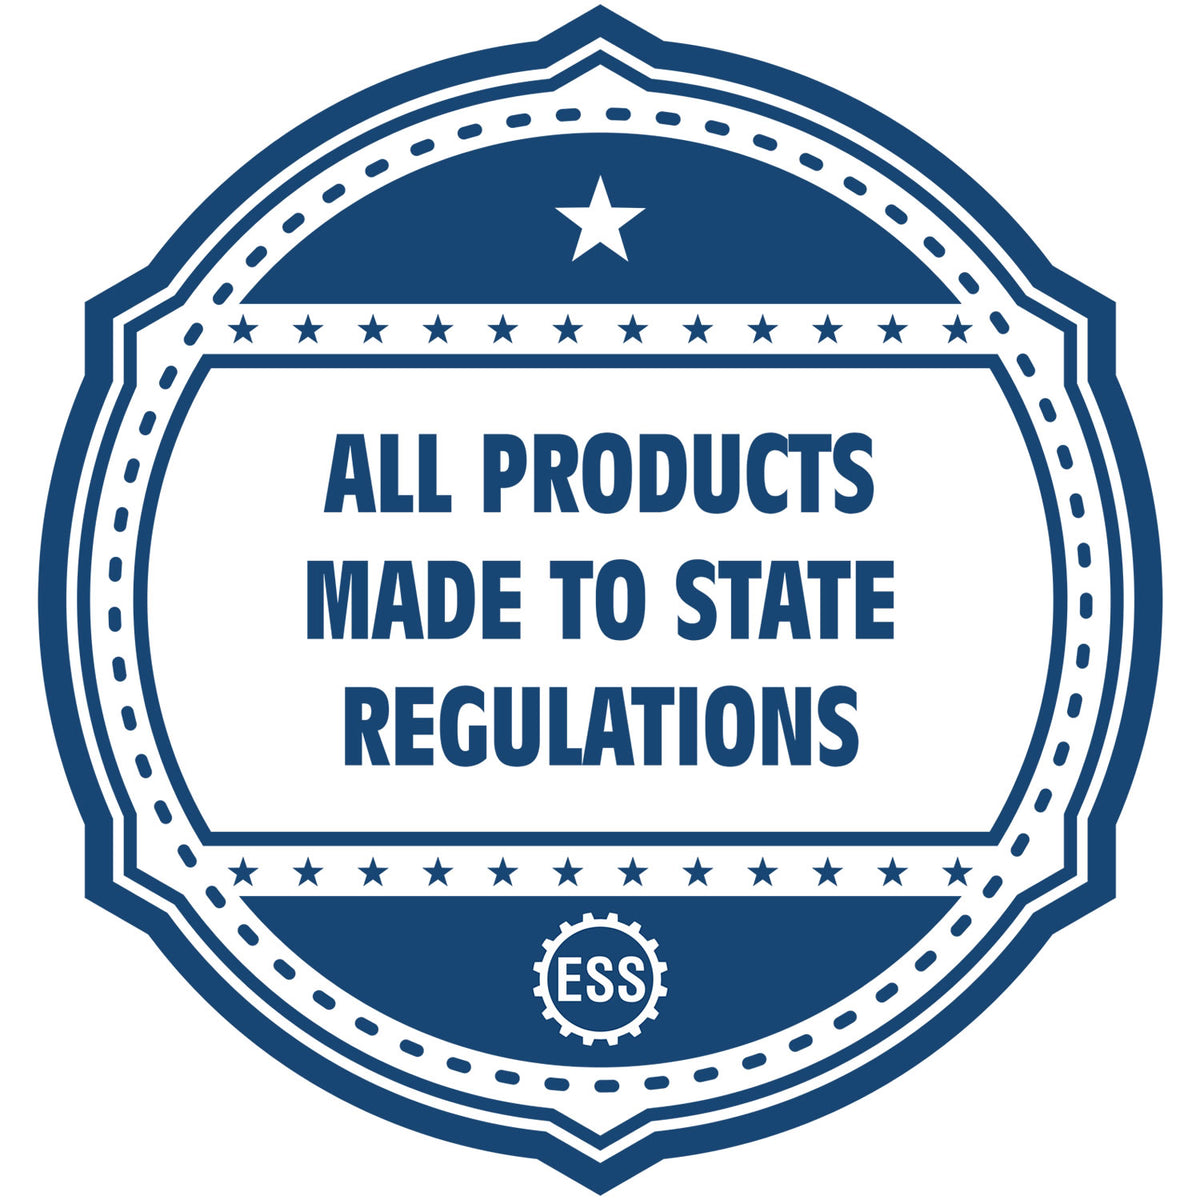 An icon or badge element for the Slim Pre-Inked Rectangular Notary Stamp for Pennsylvania showing that this product is made in compliance with state regulations.